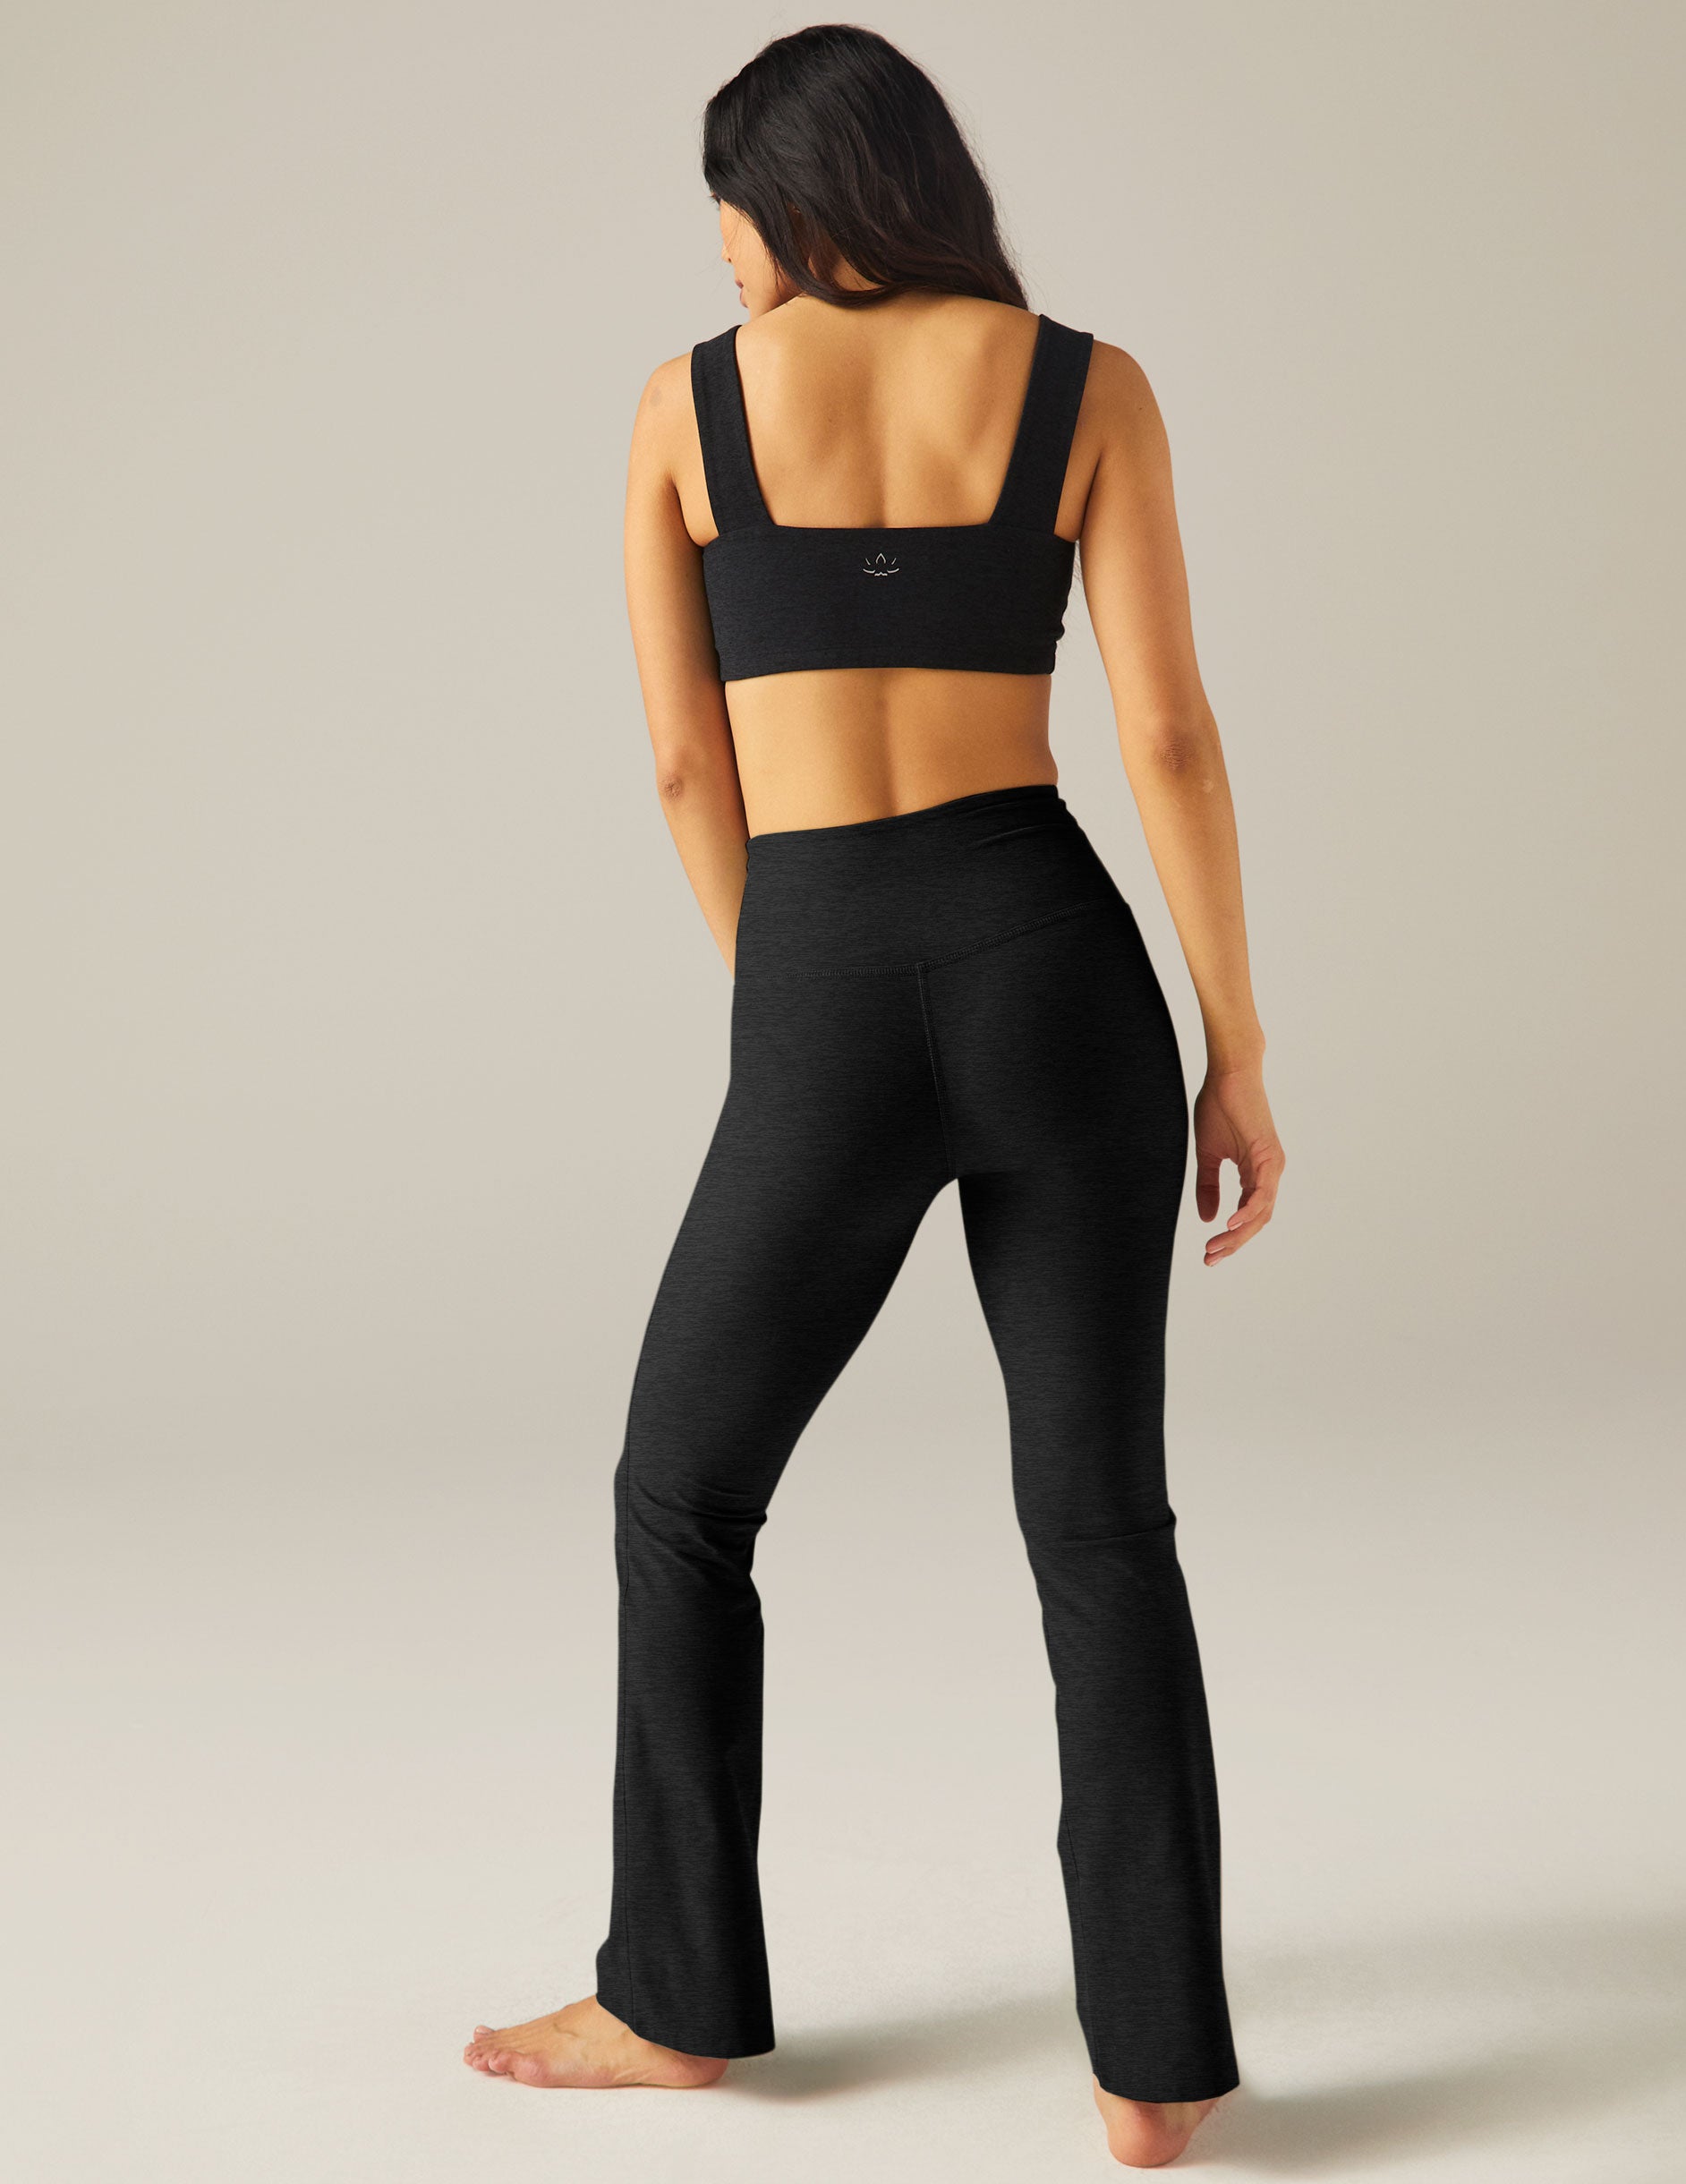 Looking for a pair of “flared” yoga pants that isn't going to drag